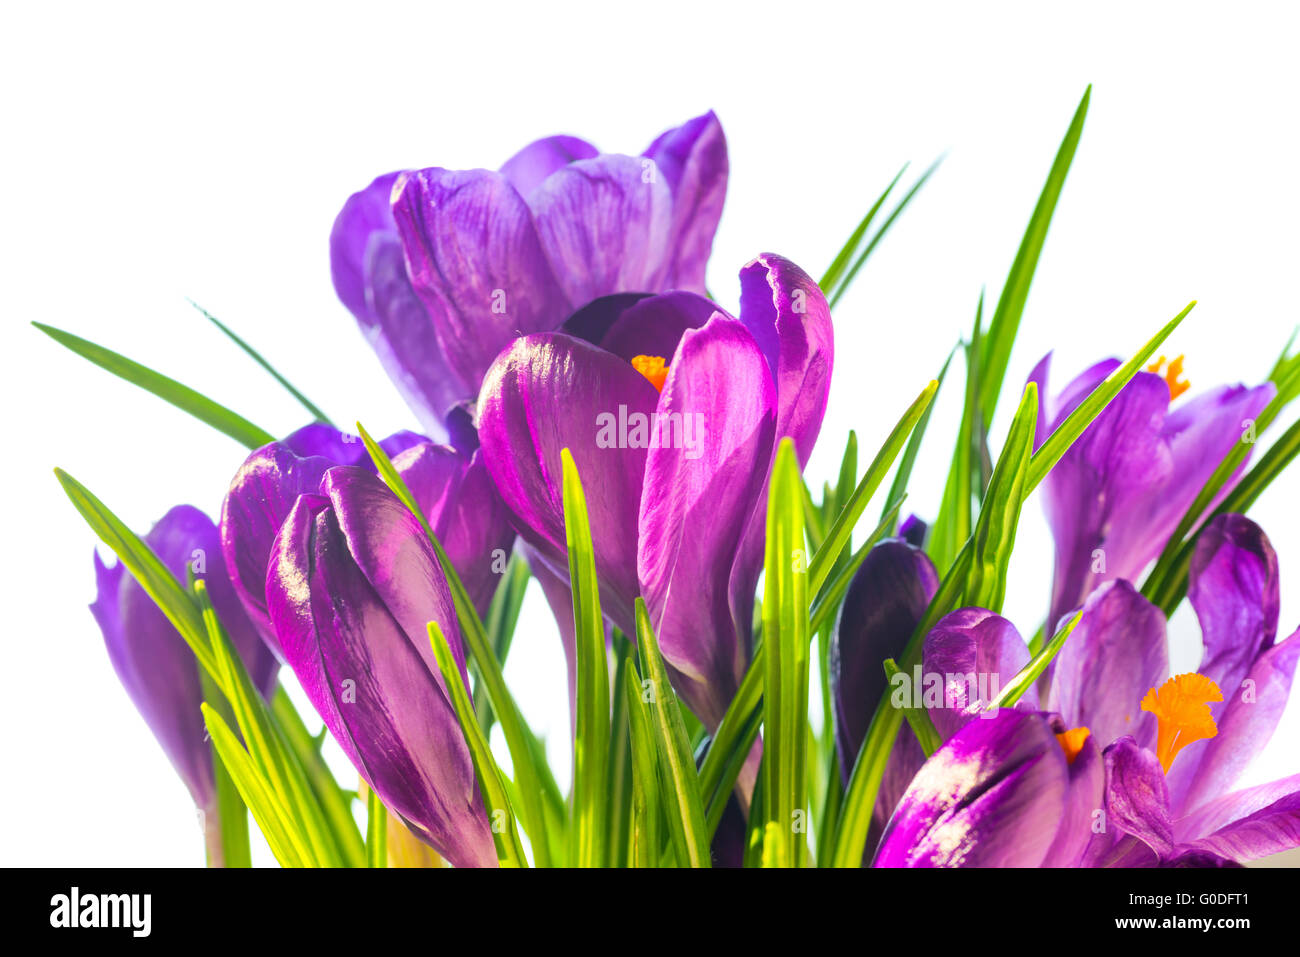 First spring flowers - bouquet of purple crocuses Stock Photo